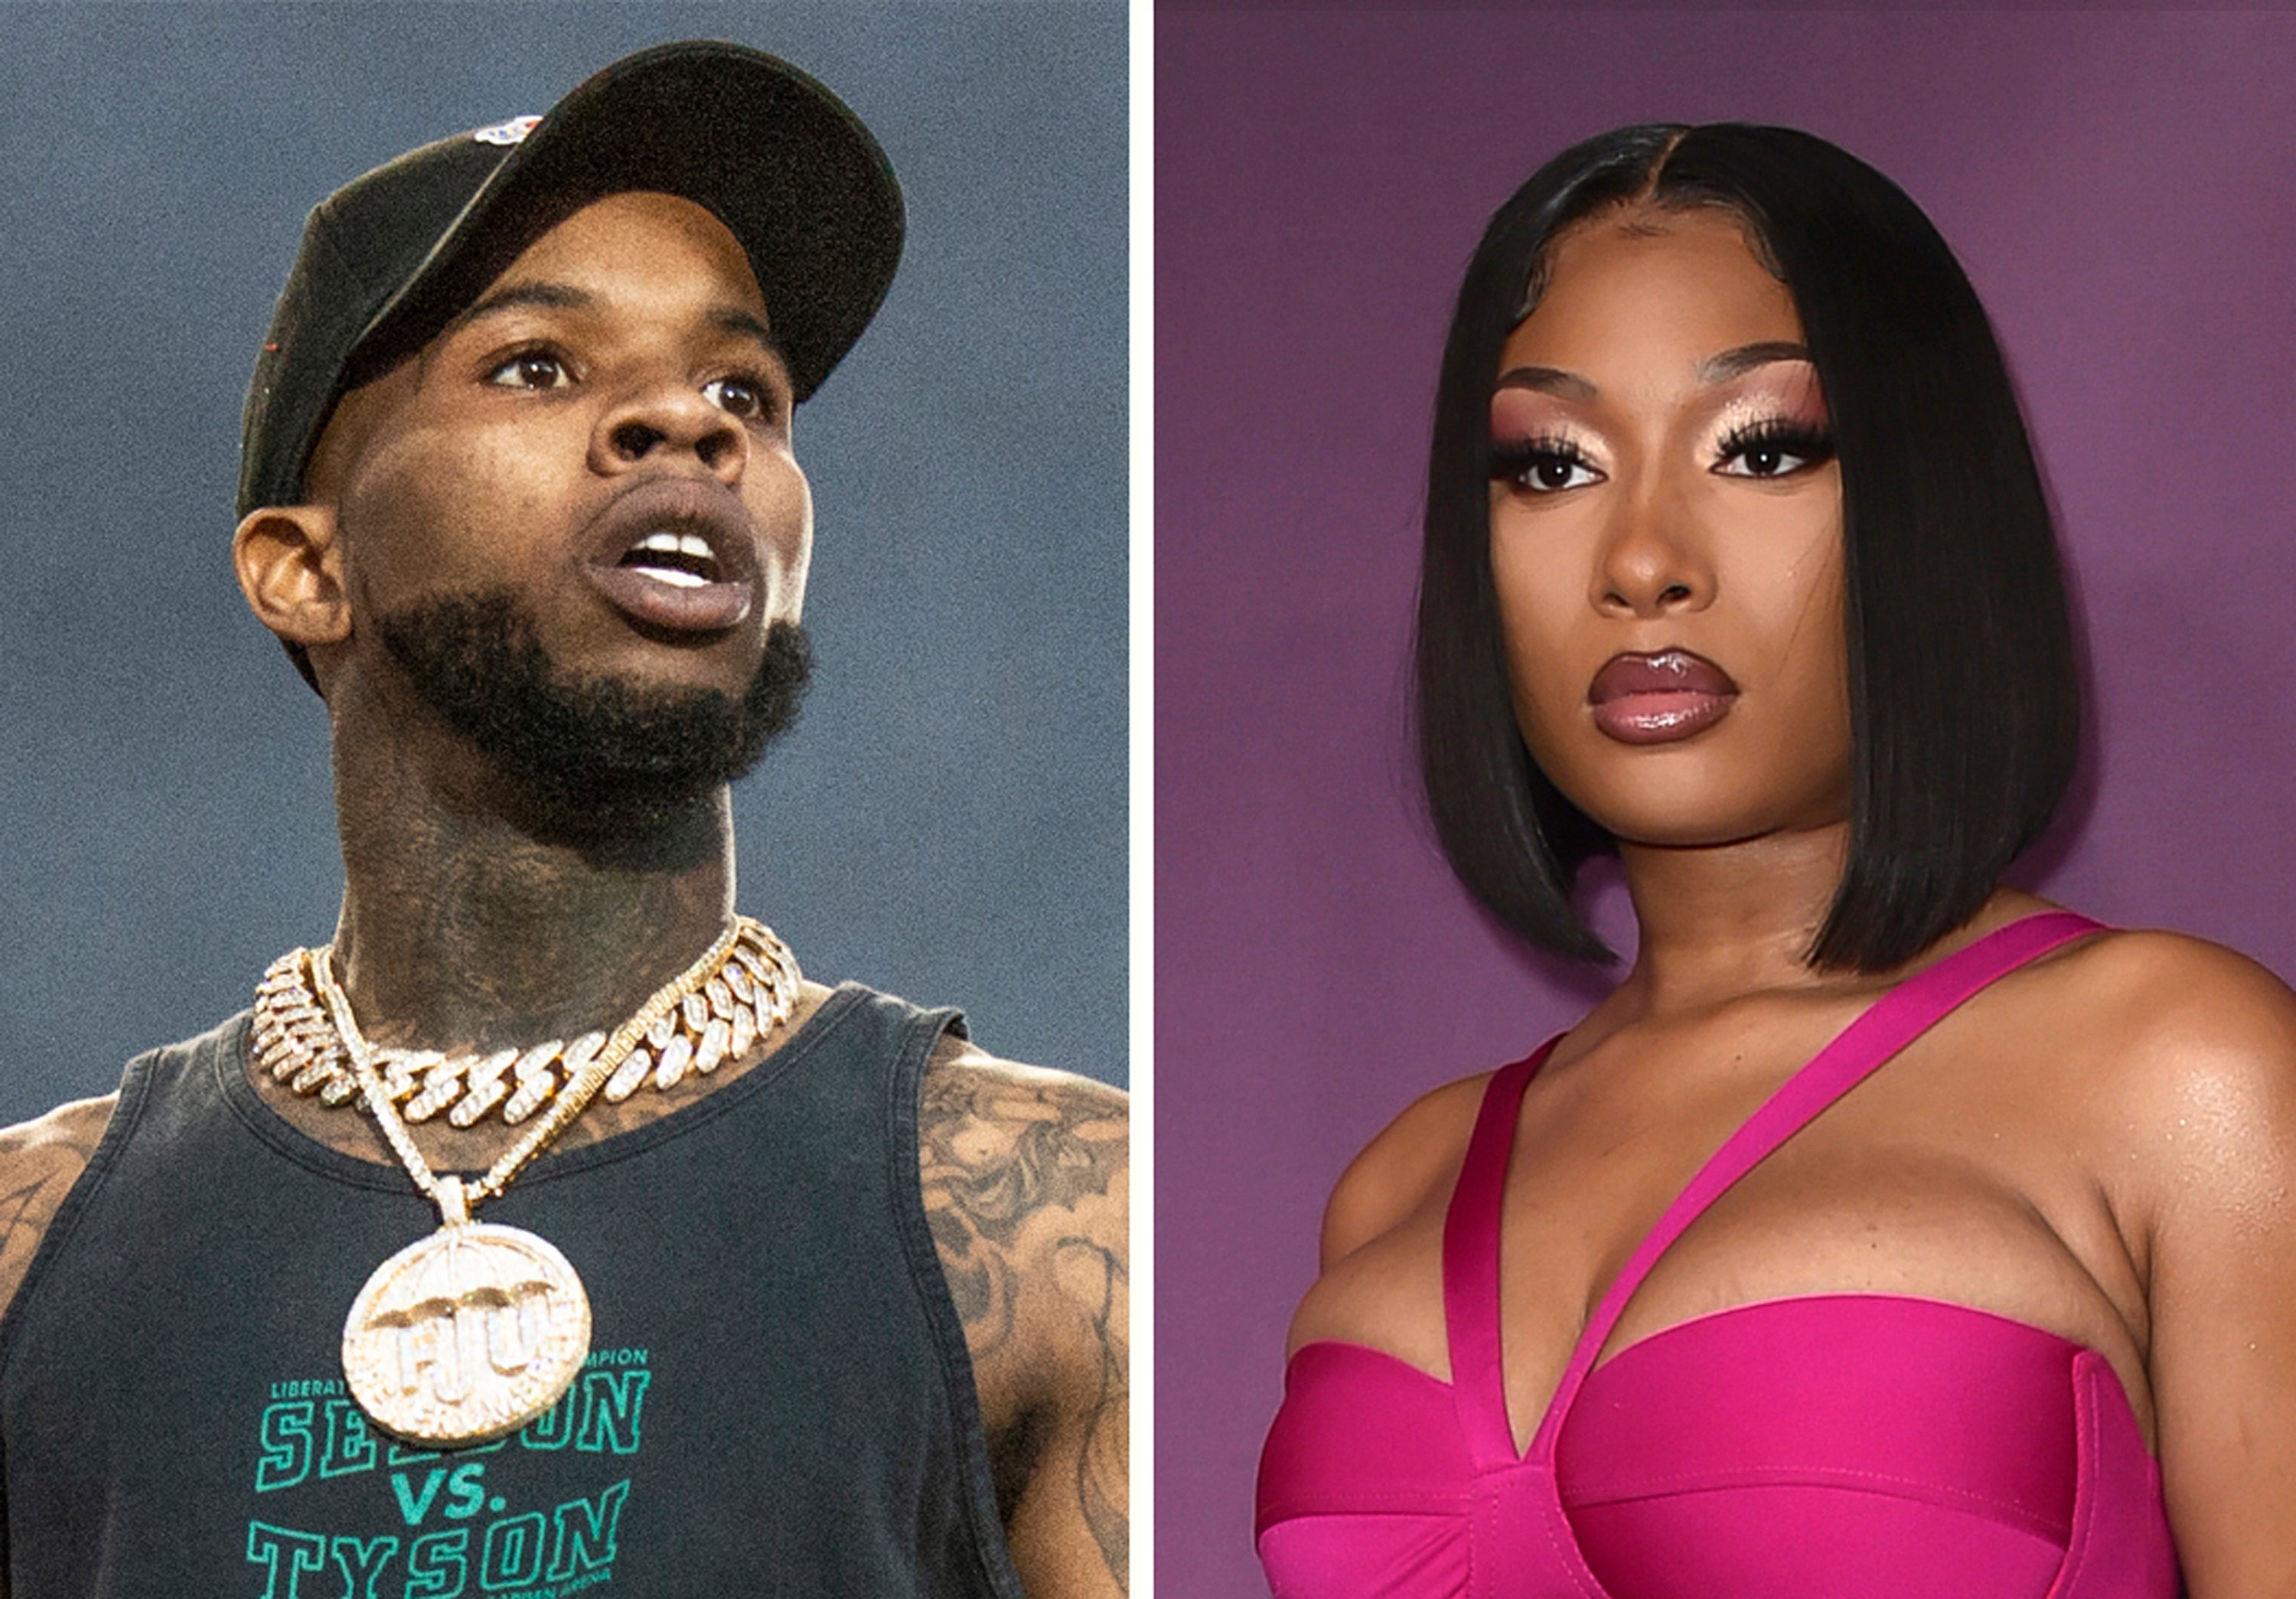 Tory Lanez was convicted for the 2020 shooting of Megan Thee Stallion